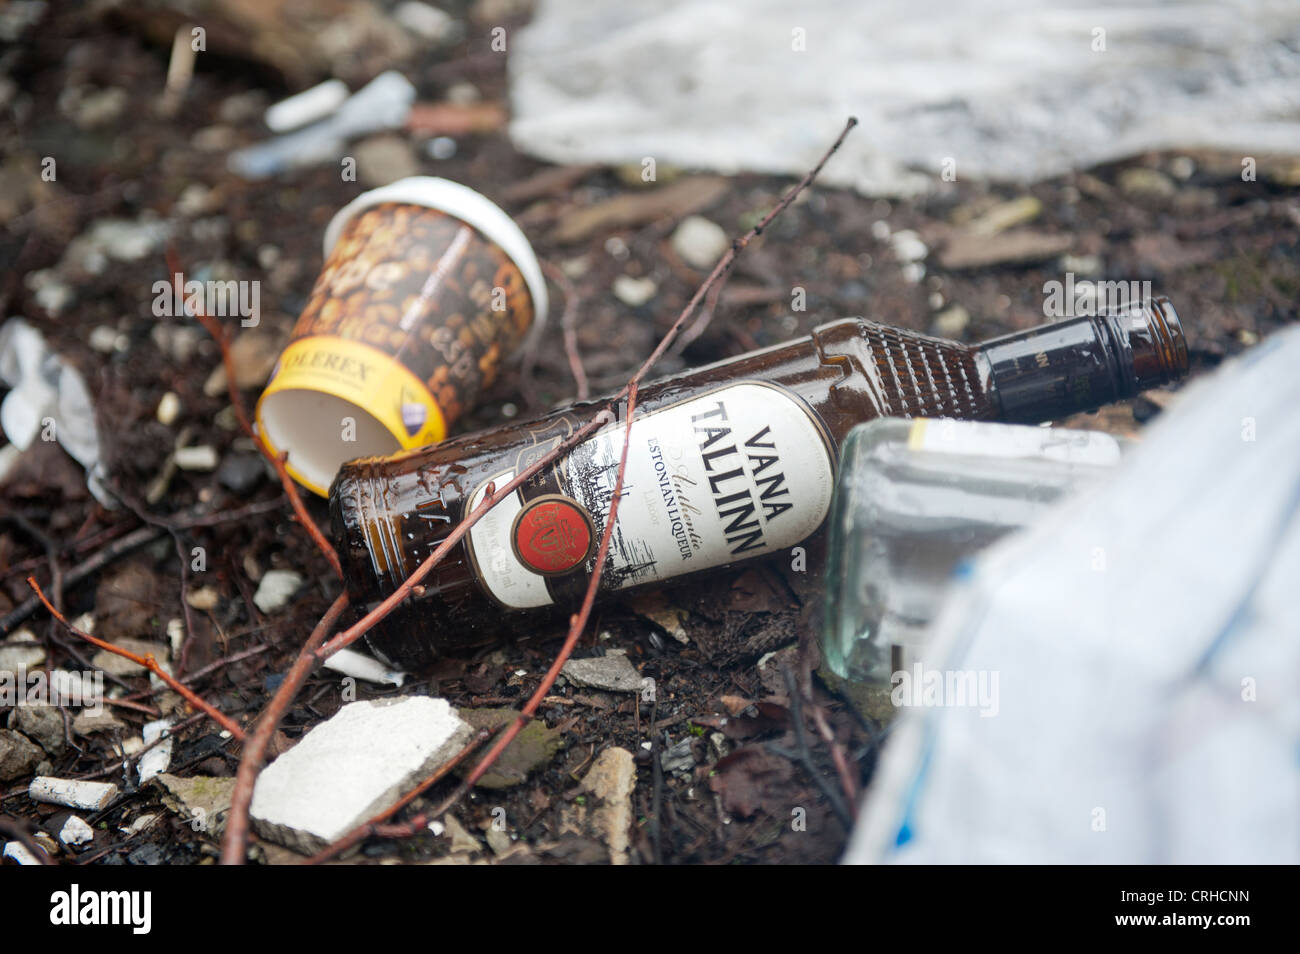 A bottle of Vina Tallinna lies empty on the ground of an abandoned building in Tallinn, Estonia, Baltic States Stock Photo